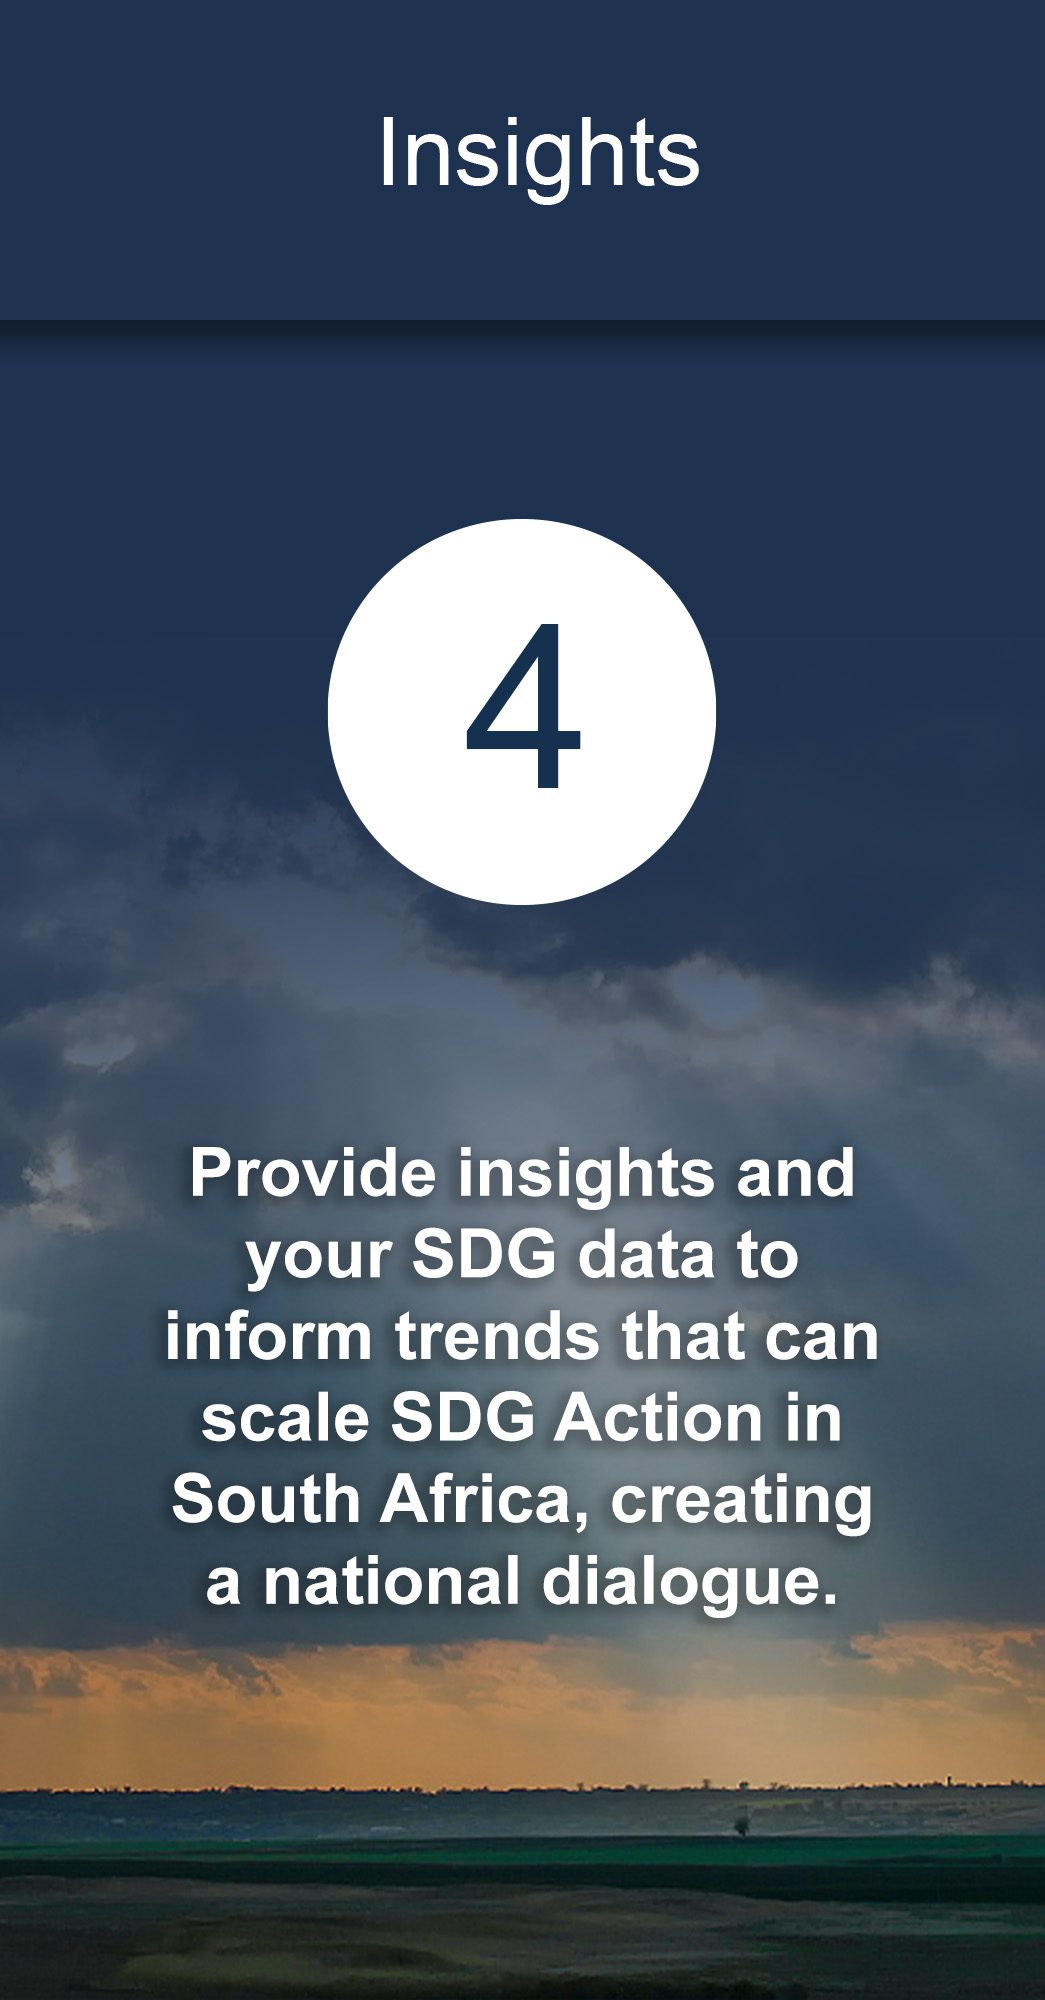 Provide insights and your SDG data to inform trends that can scale SDG Action in South Africa, creating a national dialogue.